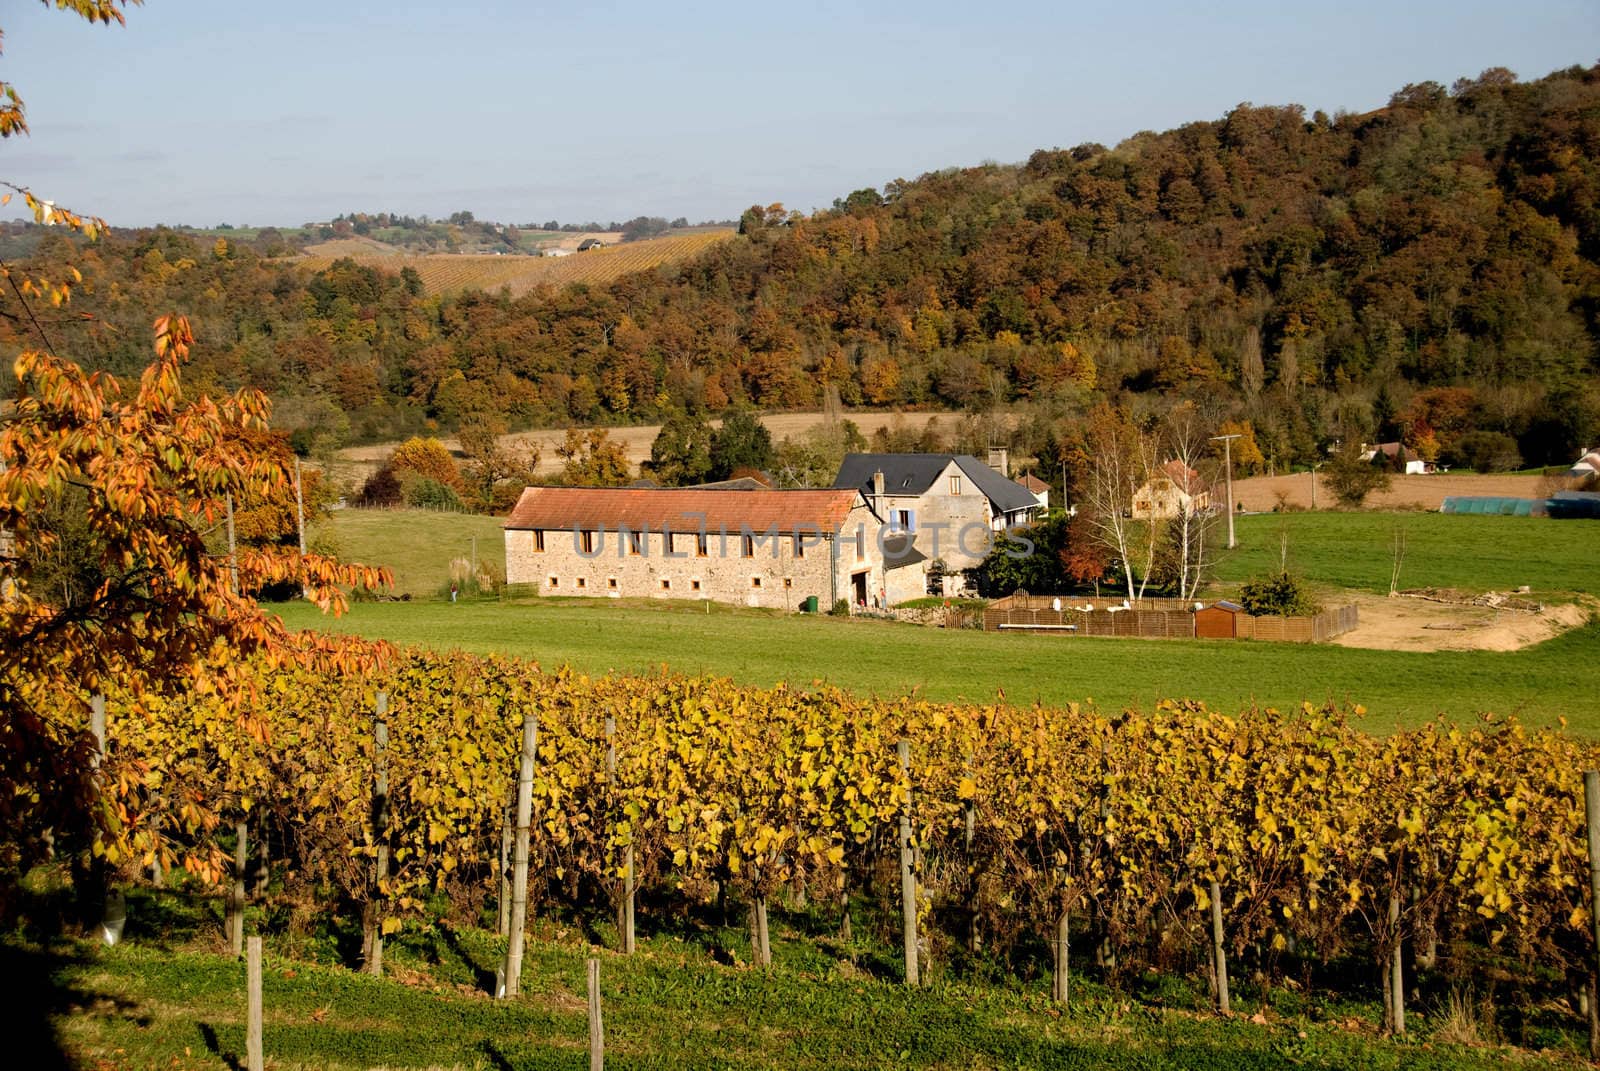 Home and vineyard in Aquitane France by ACMPhoto